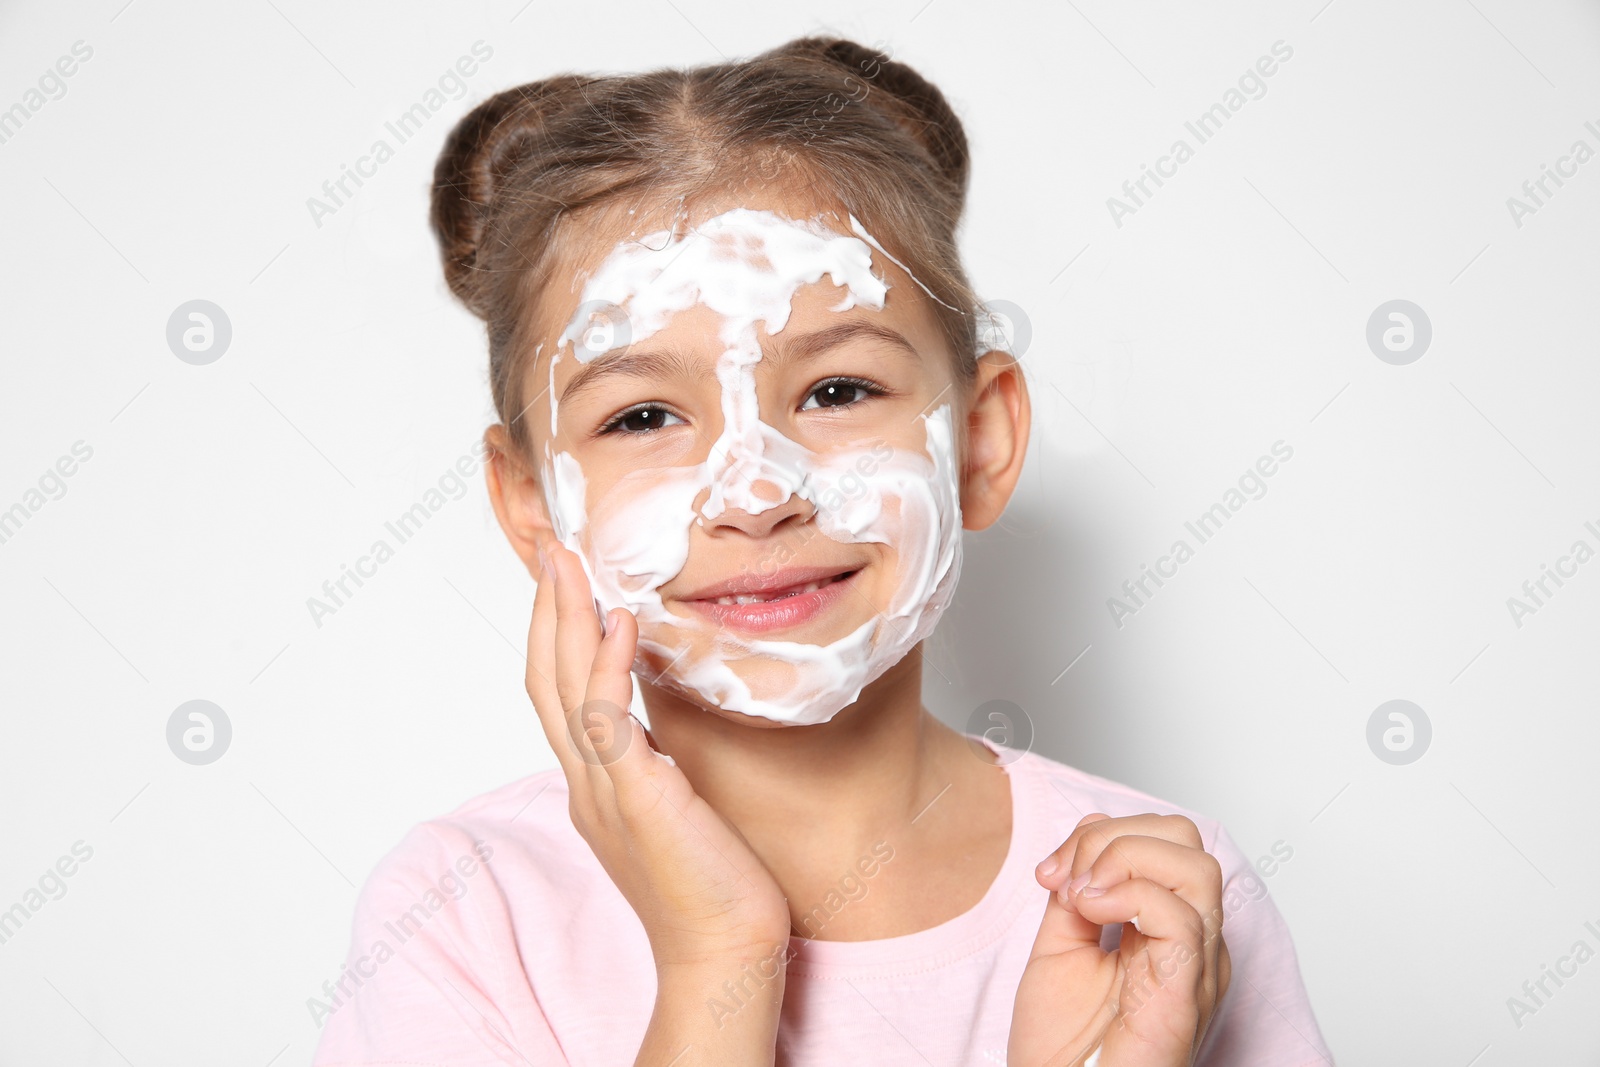 Photo of Cute little girl with soap foam on face against white background